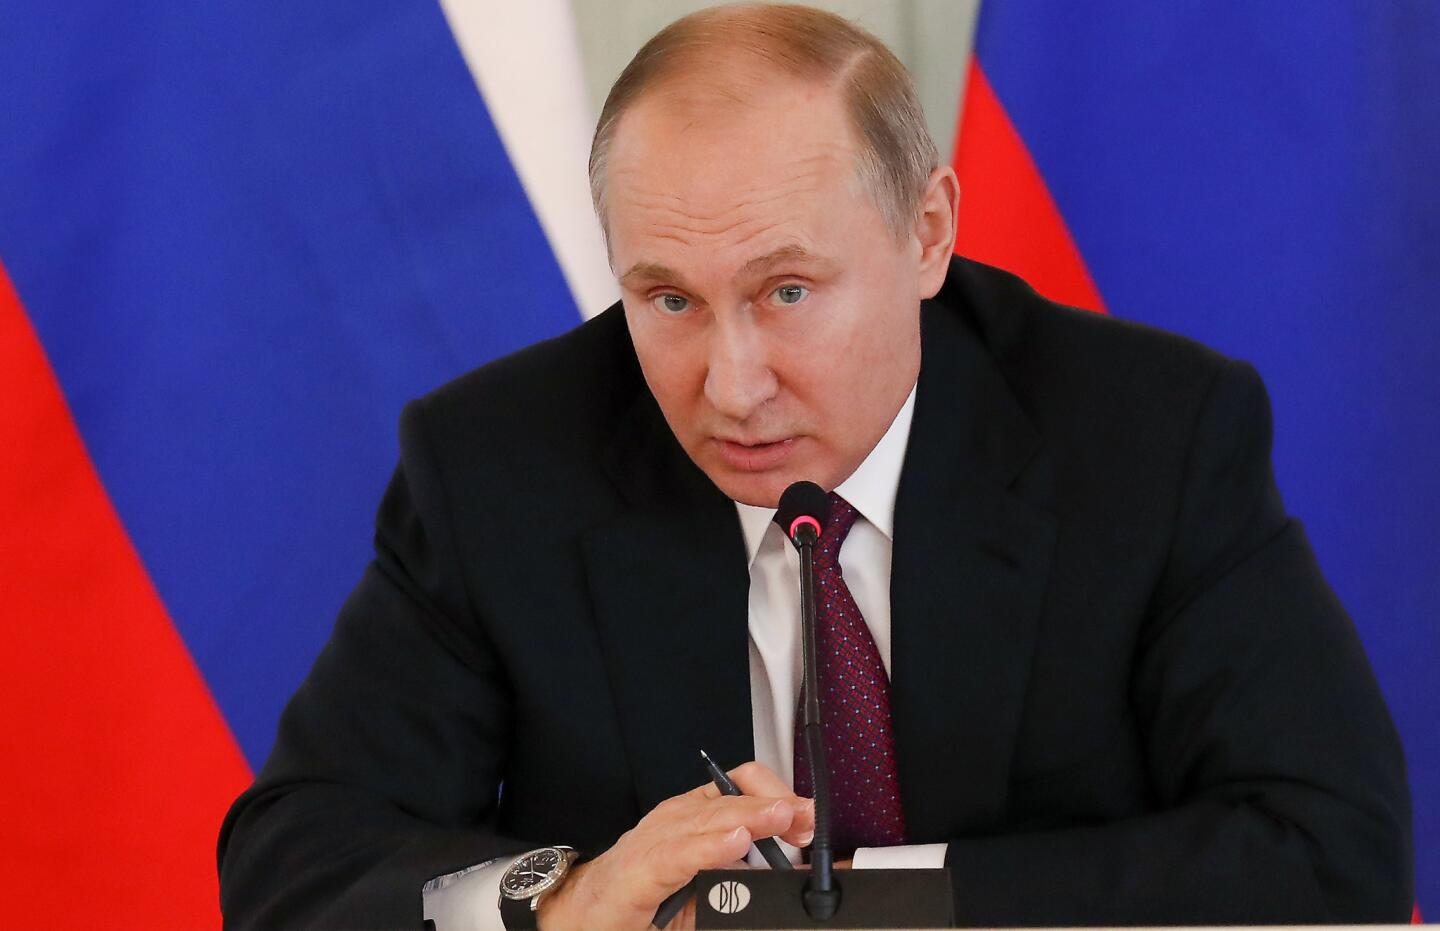 Russian President Vladimir Putin acknowledged that some "patriotic" individuals may have engaged in hacking in the U.S. election, but continues to deny government involvement. After President Barack Obama announced sanctions on Russian spy agencies and expelled 35 diplomats, Putin declined to immediately retaliate, drawing praise from President-elect Donald Trump. On Jan. 17, 2017, Putin took a parting shot at the Obama administration, accusing it of trying to undermine Trump's election and calling a dossier alleging Russian spy agencies collected compromising material on Trump as "nonsense." After a report that Trump revealed classified information in a May 10 meeting with Russian diplomats, Putin offered to turn over to Congress records of the discussion. In a June 2017 interview with NBC's Megyn Kelly, Putin dismissed as "a load of nonsense" that Russia has damaging information on Trump. After 13 Russians were indicted by the United States in February 2018 for election-meddling, Putin insisted they didn't act on behalf of his government. Putin won re-election as Russian president on March 18, 2018, and received a phone call from Trump, congratulating him on the victory.